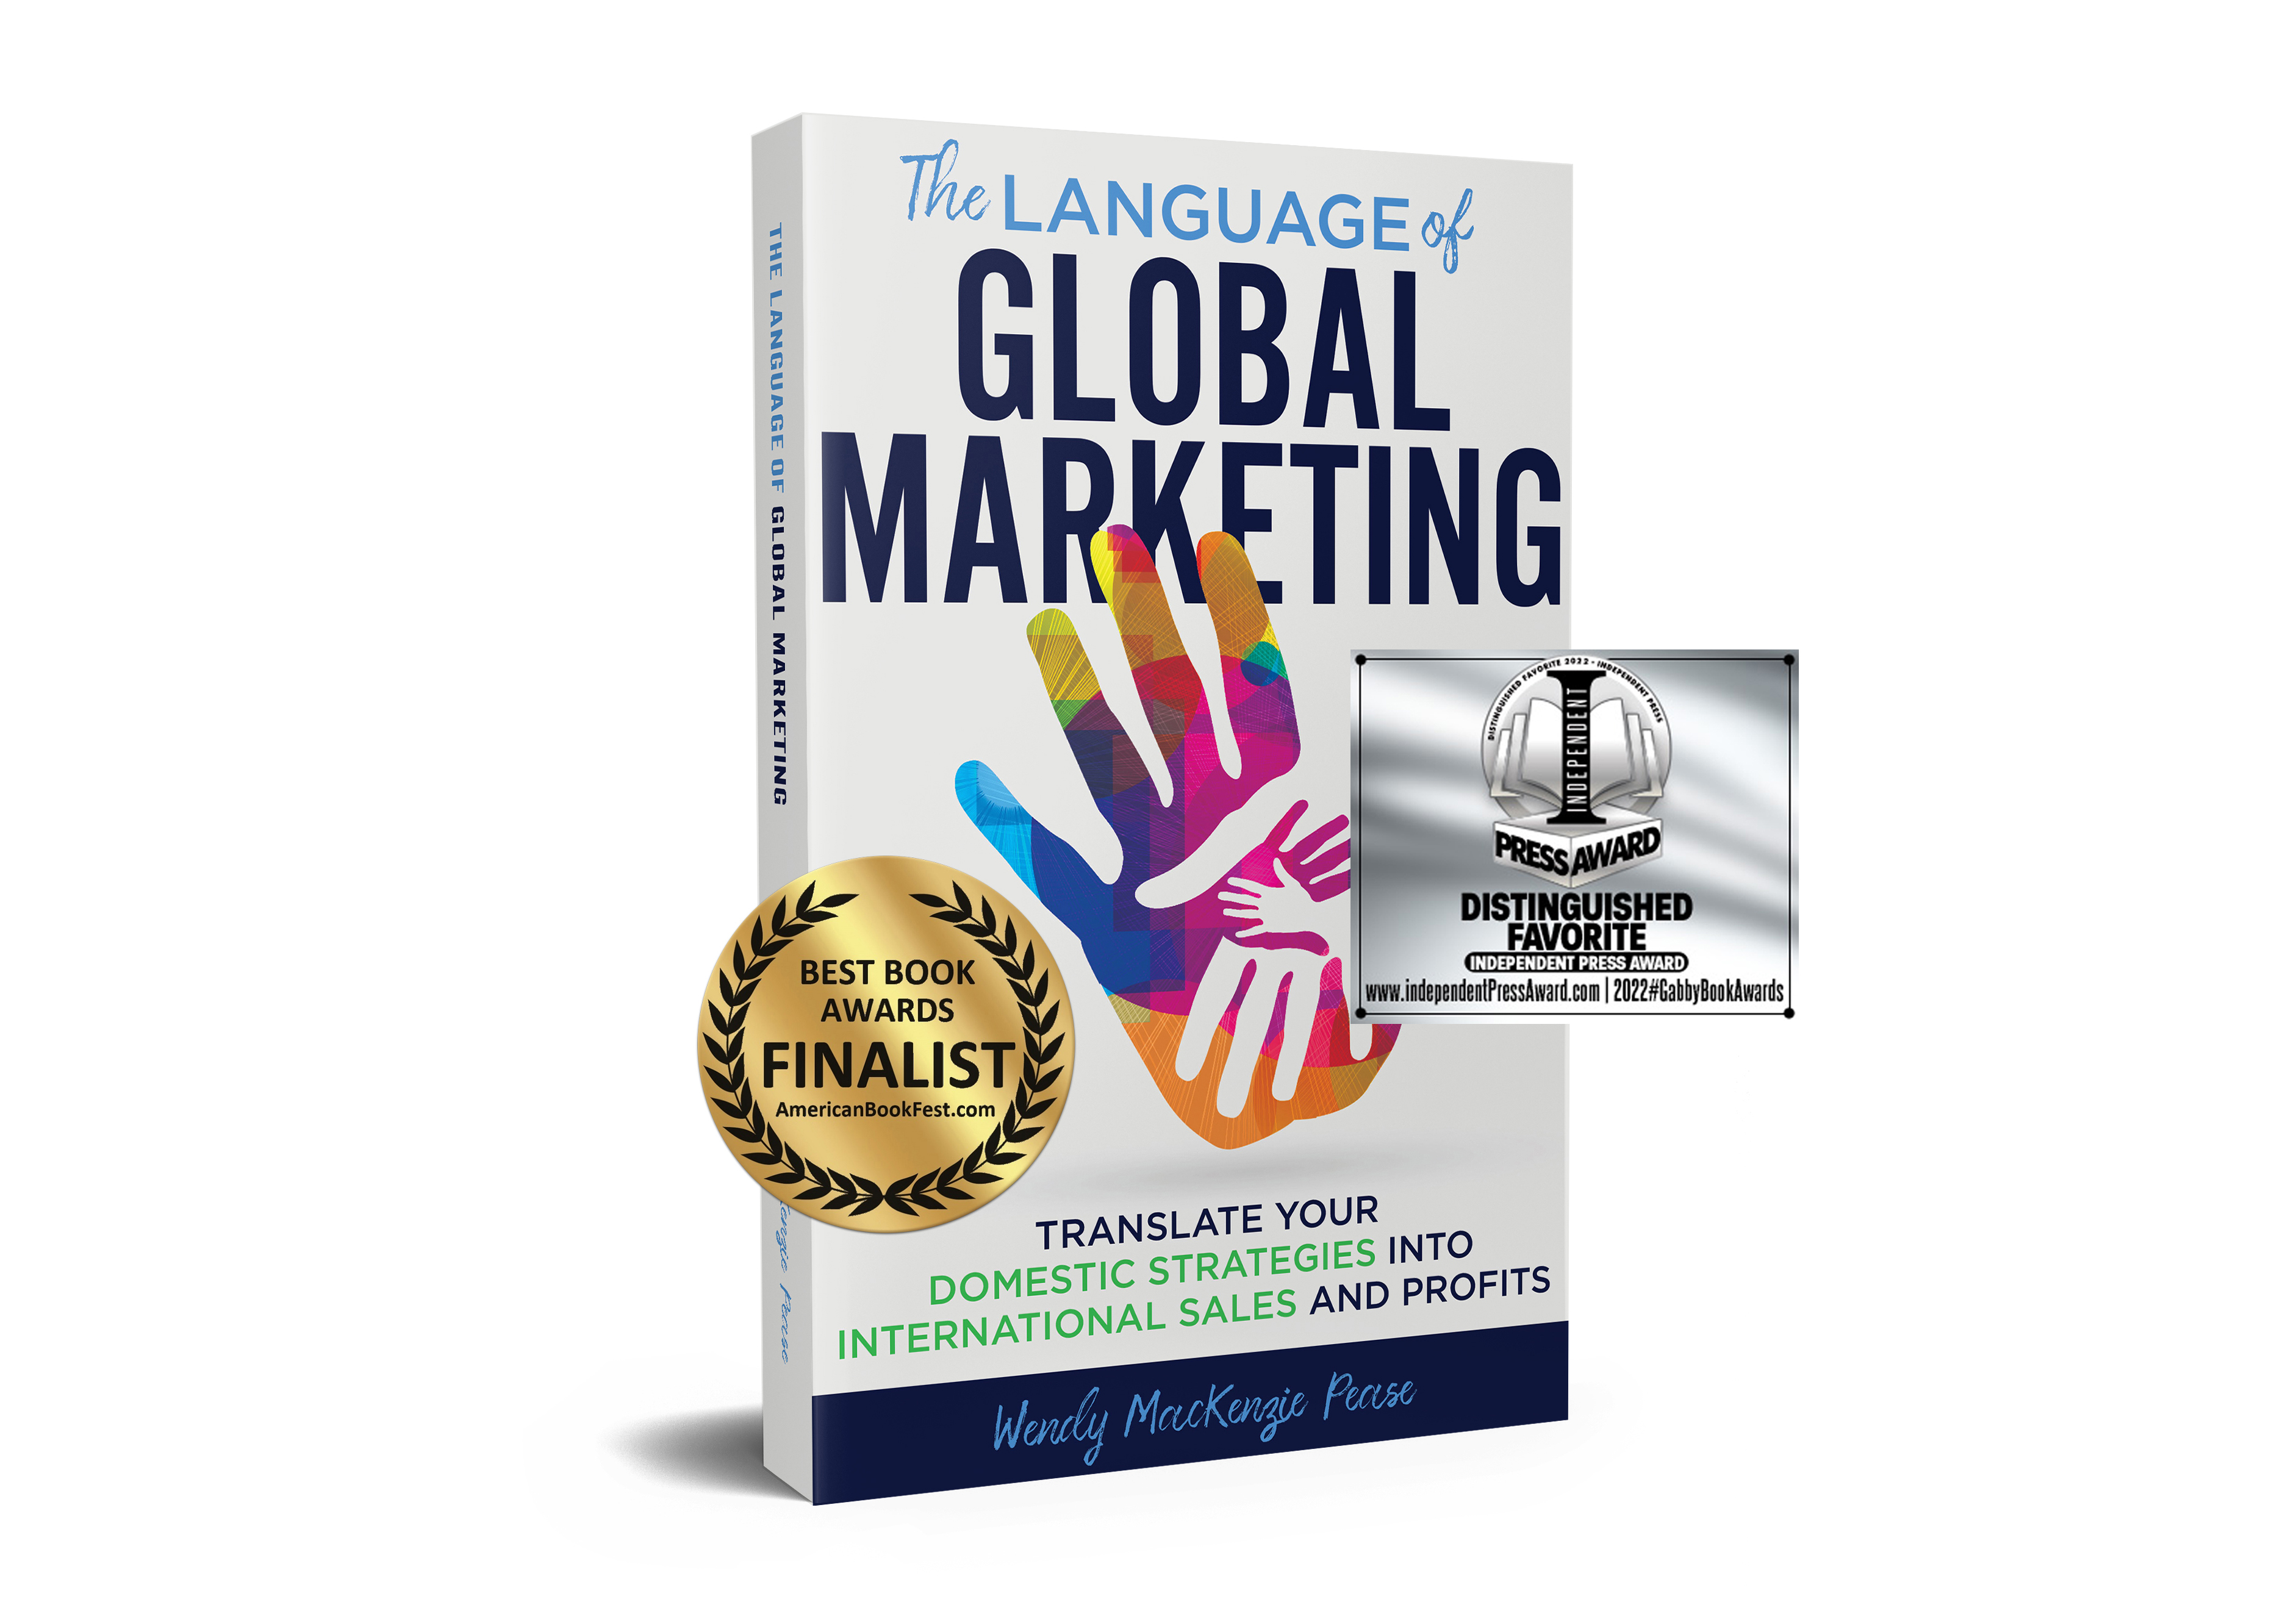 The Language of Global Marketing Recognized